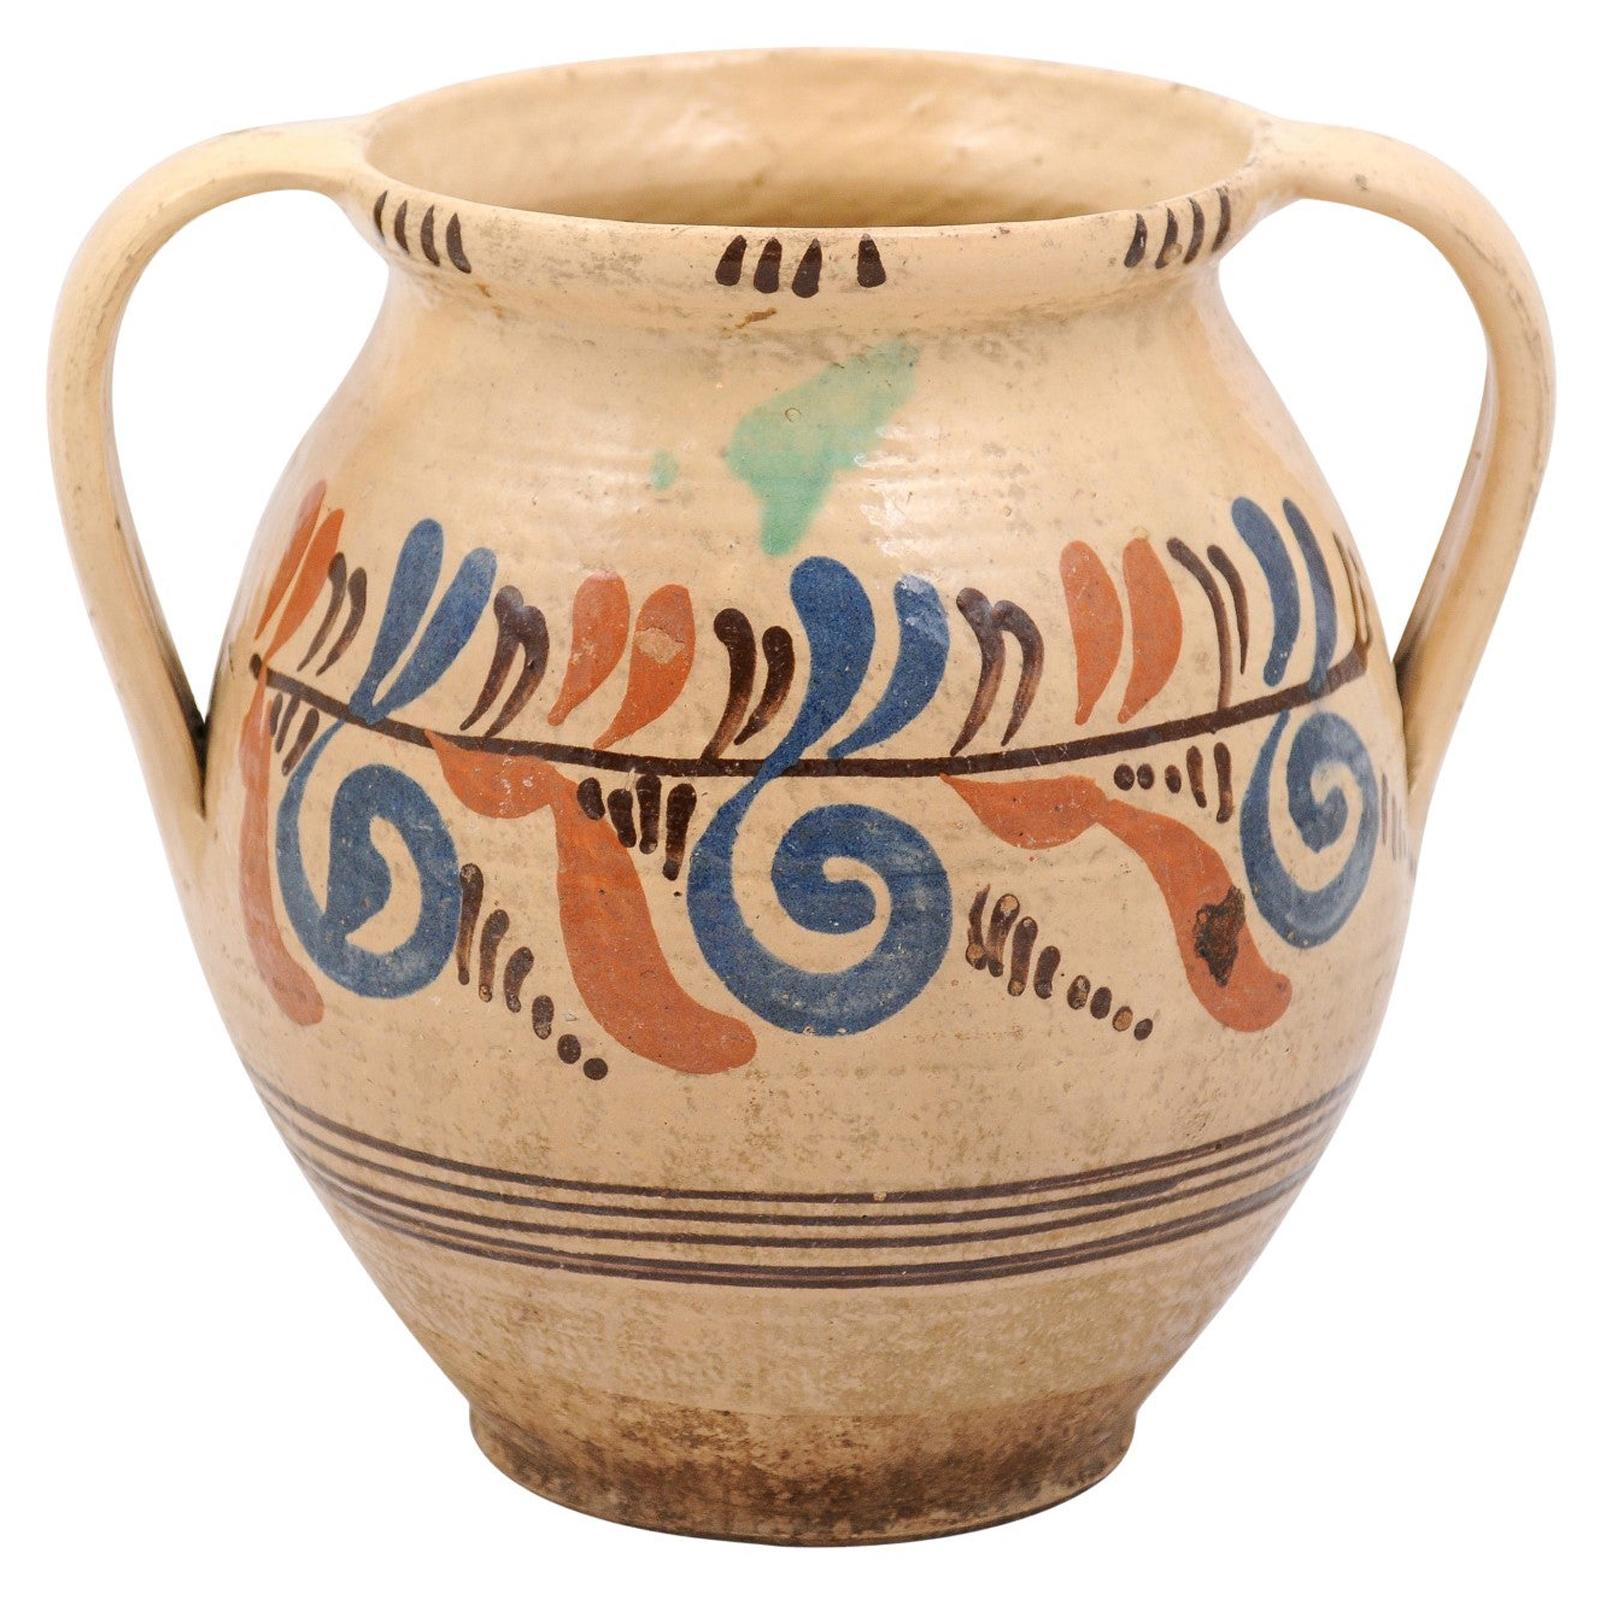 19th Century French Pottery Confit Pot with Cream Glaze, Blue and Brown Motifs